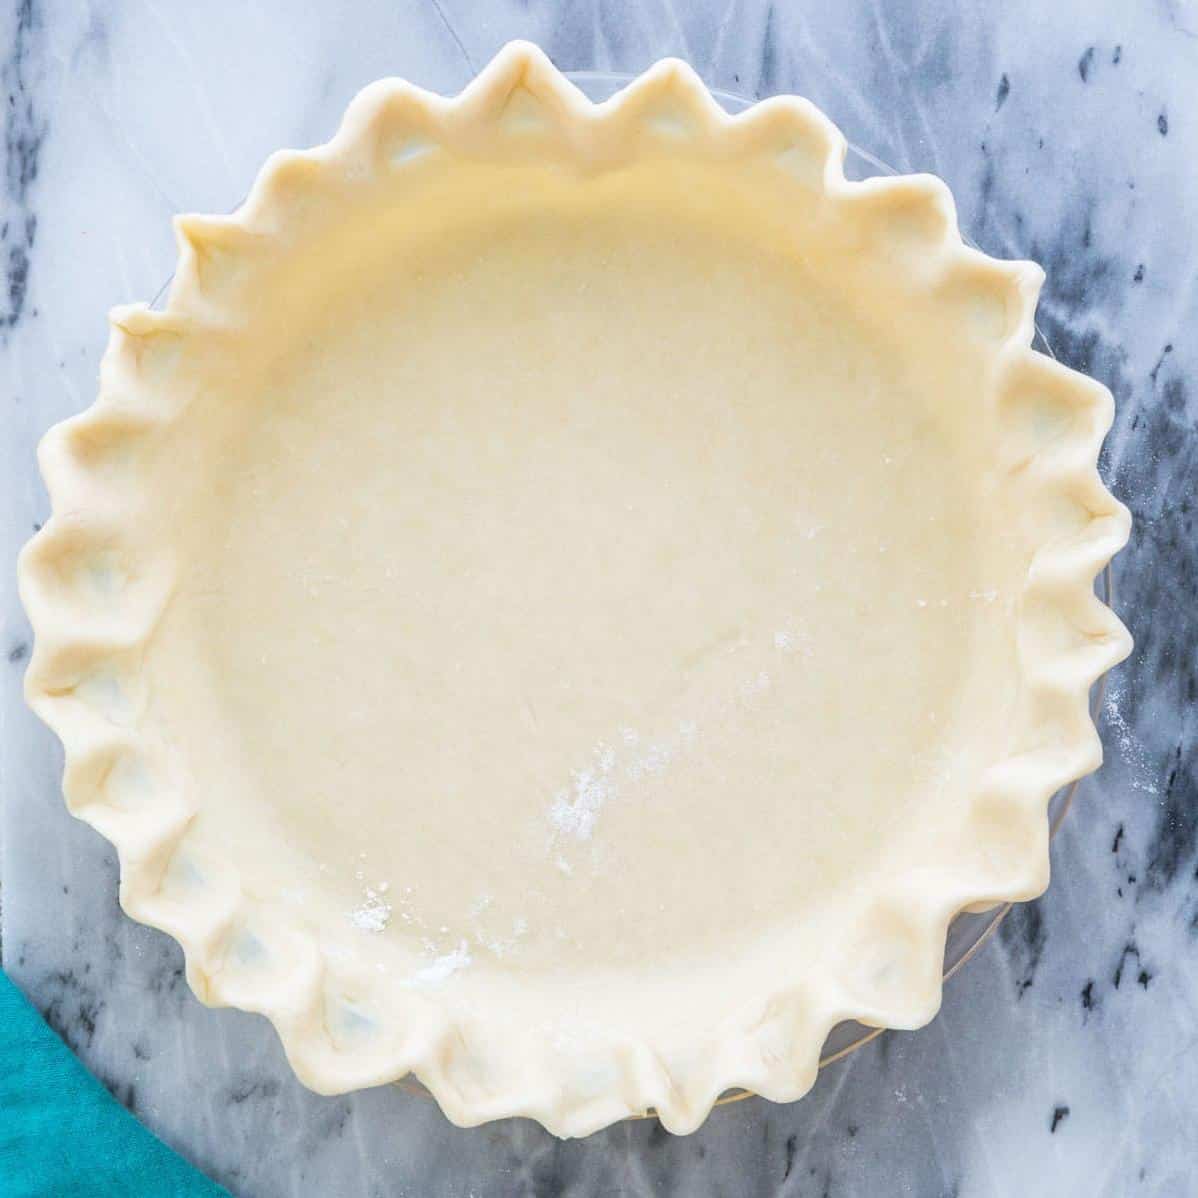  A foolproof dough for all your pie needs